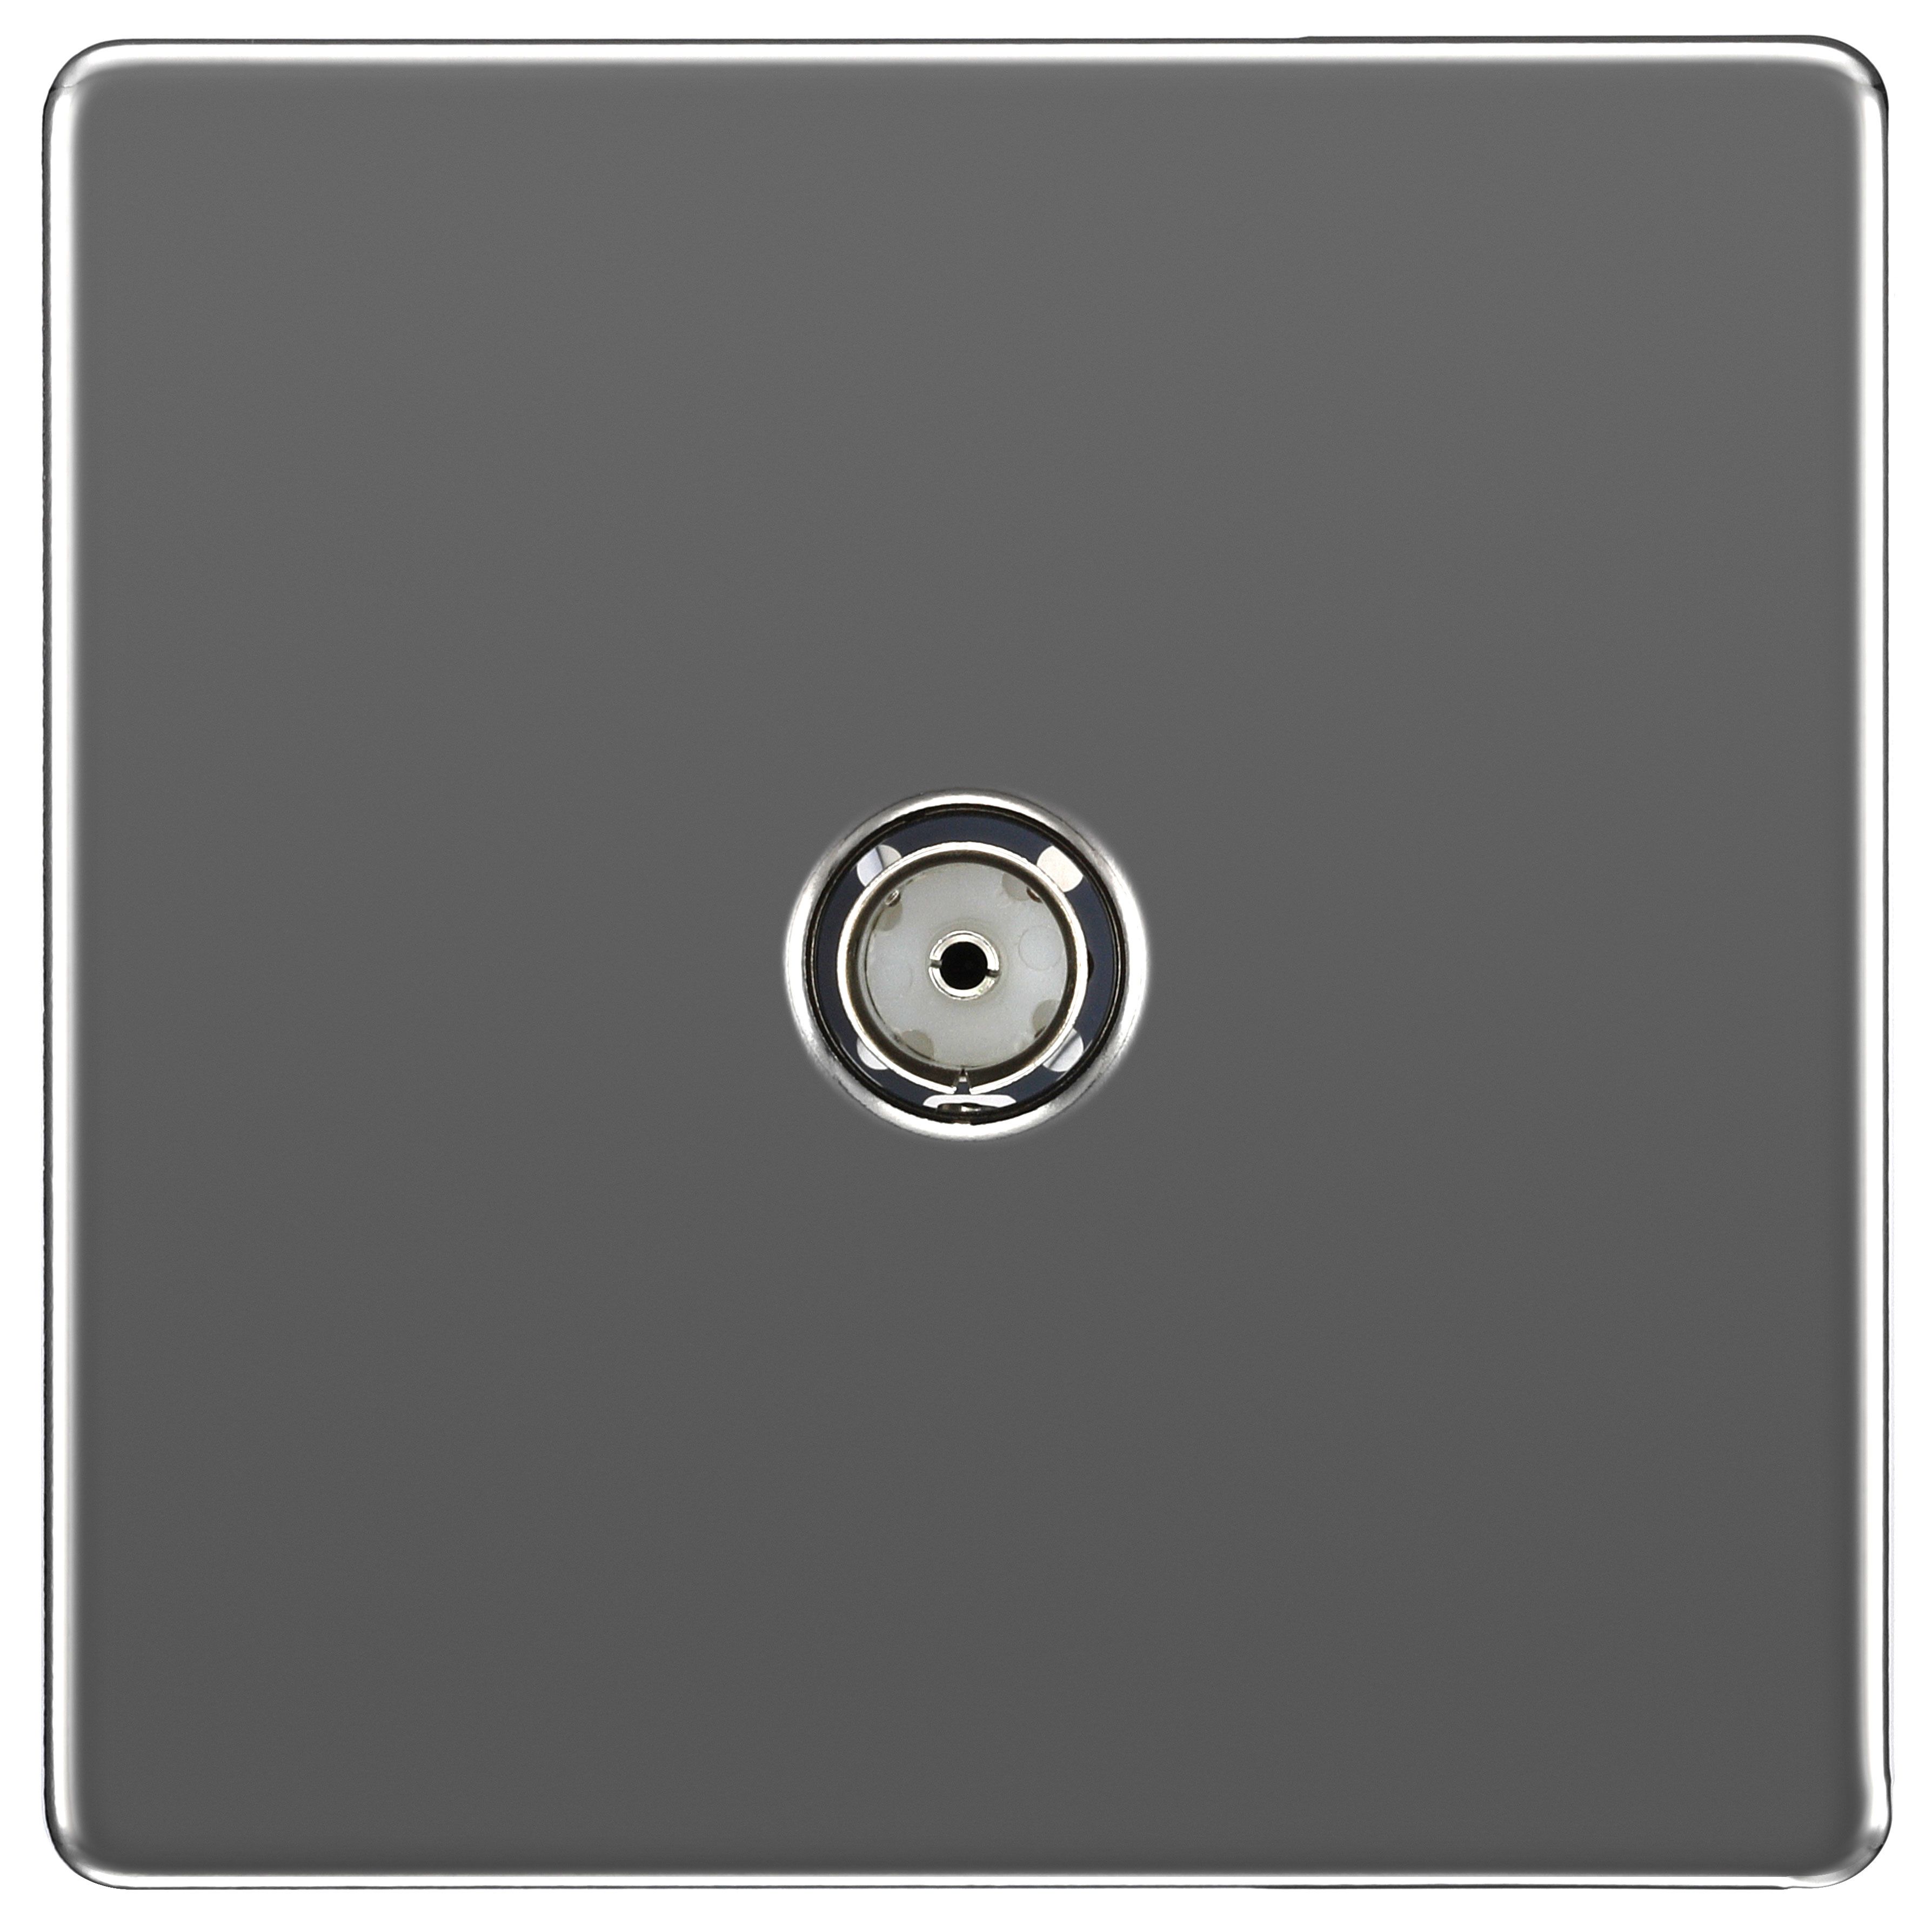 Image of BG Screwless Flat Plate Single Socket For Tv Or Fm Co-Axial Aerial Connection - Black Nickel